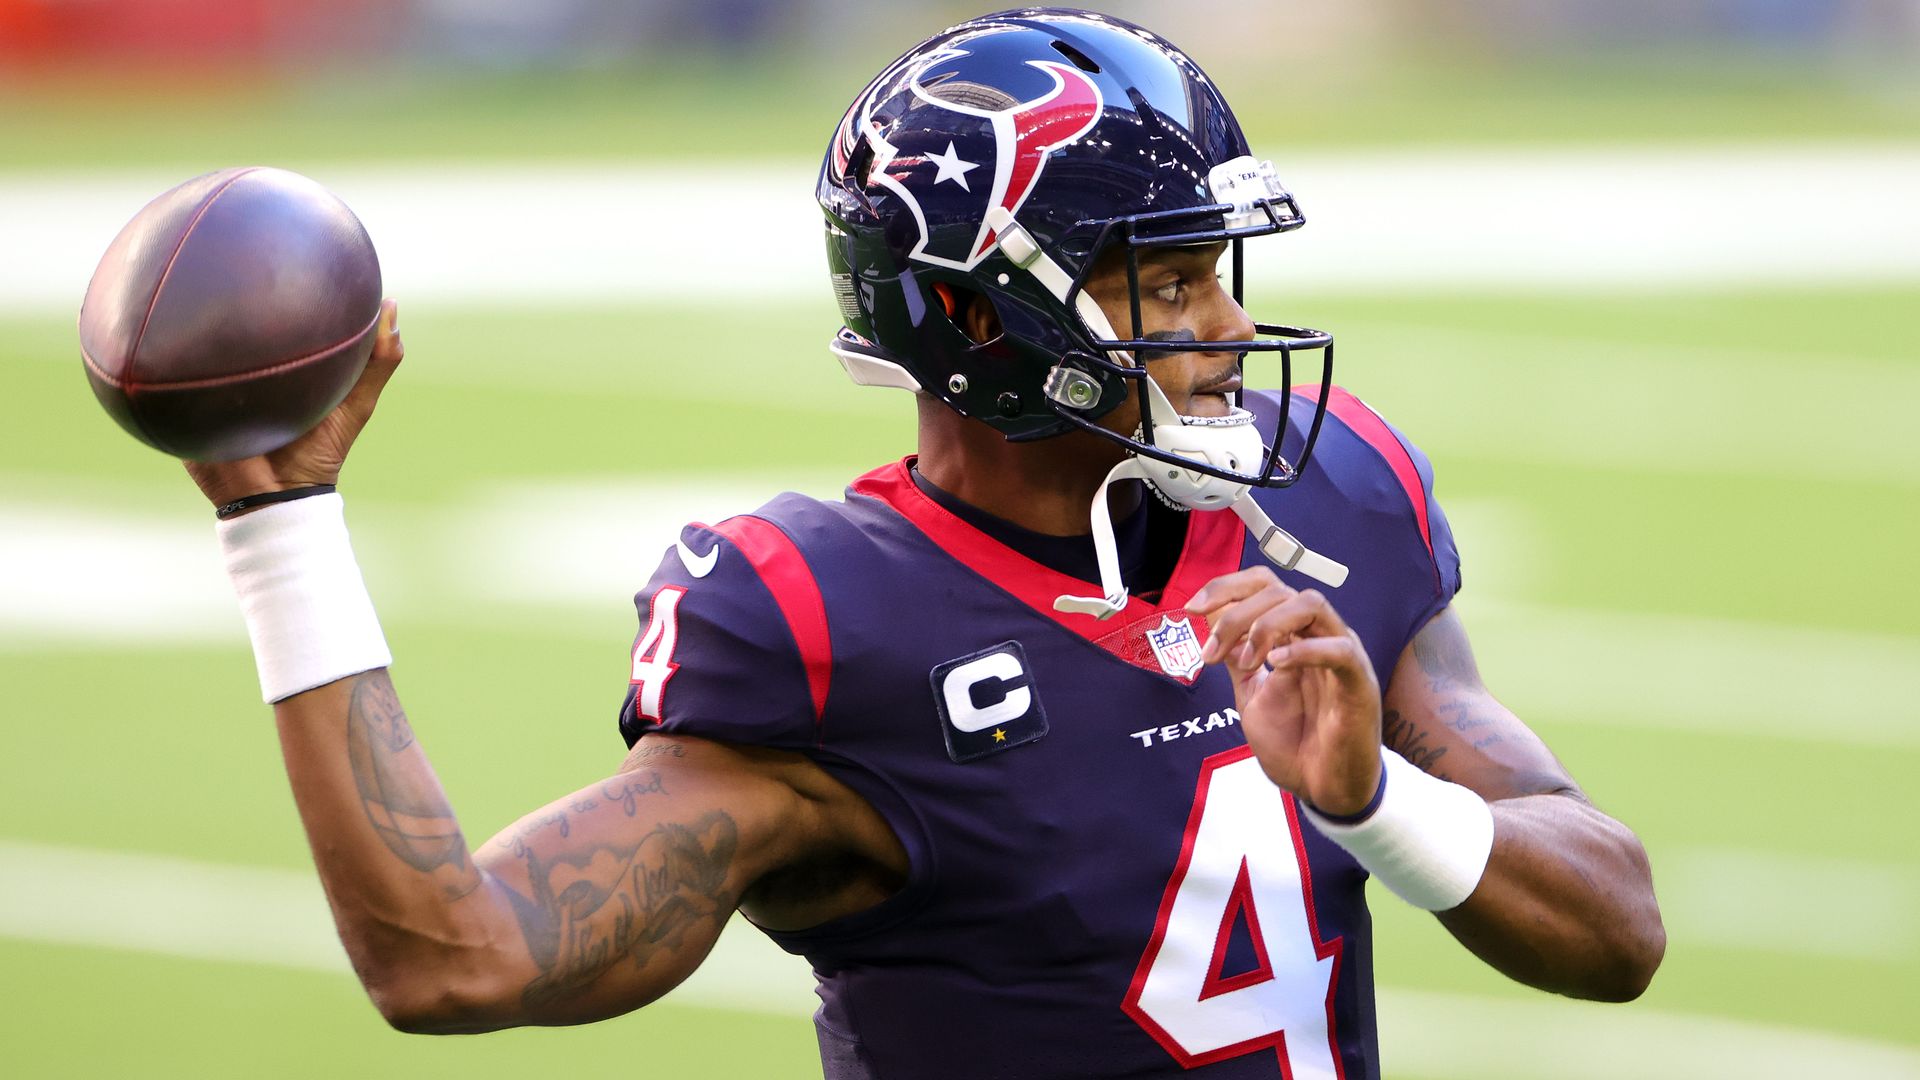 Texans QB Deshaun Watson in a game against the Tennessee Titans in Houston in January.